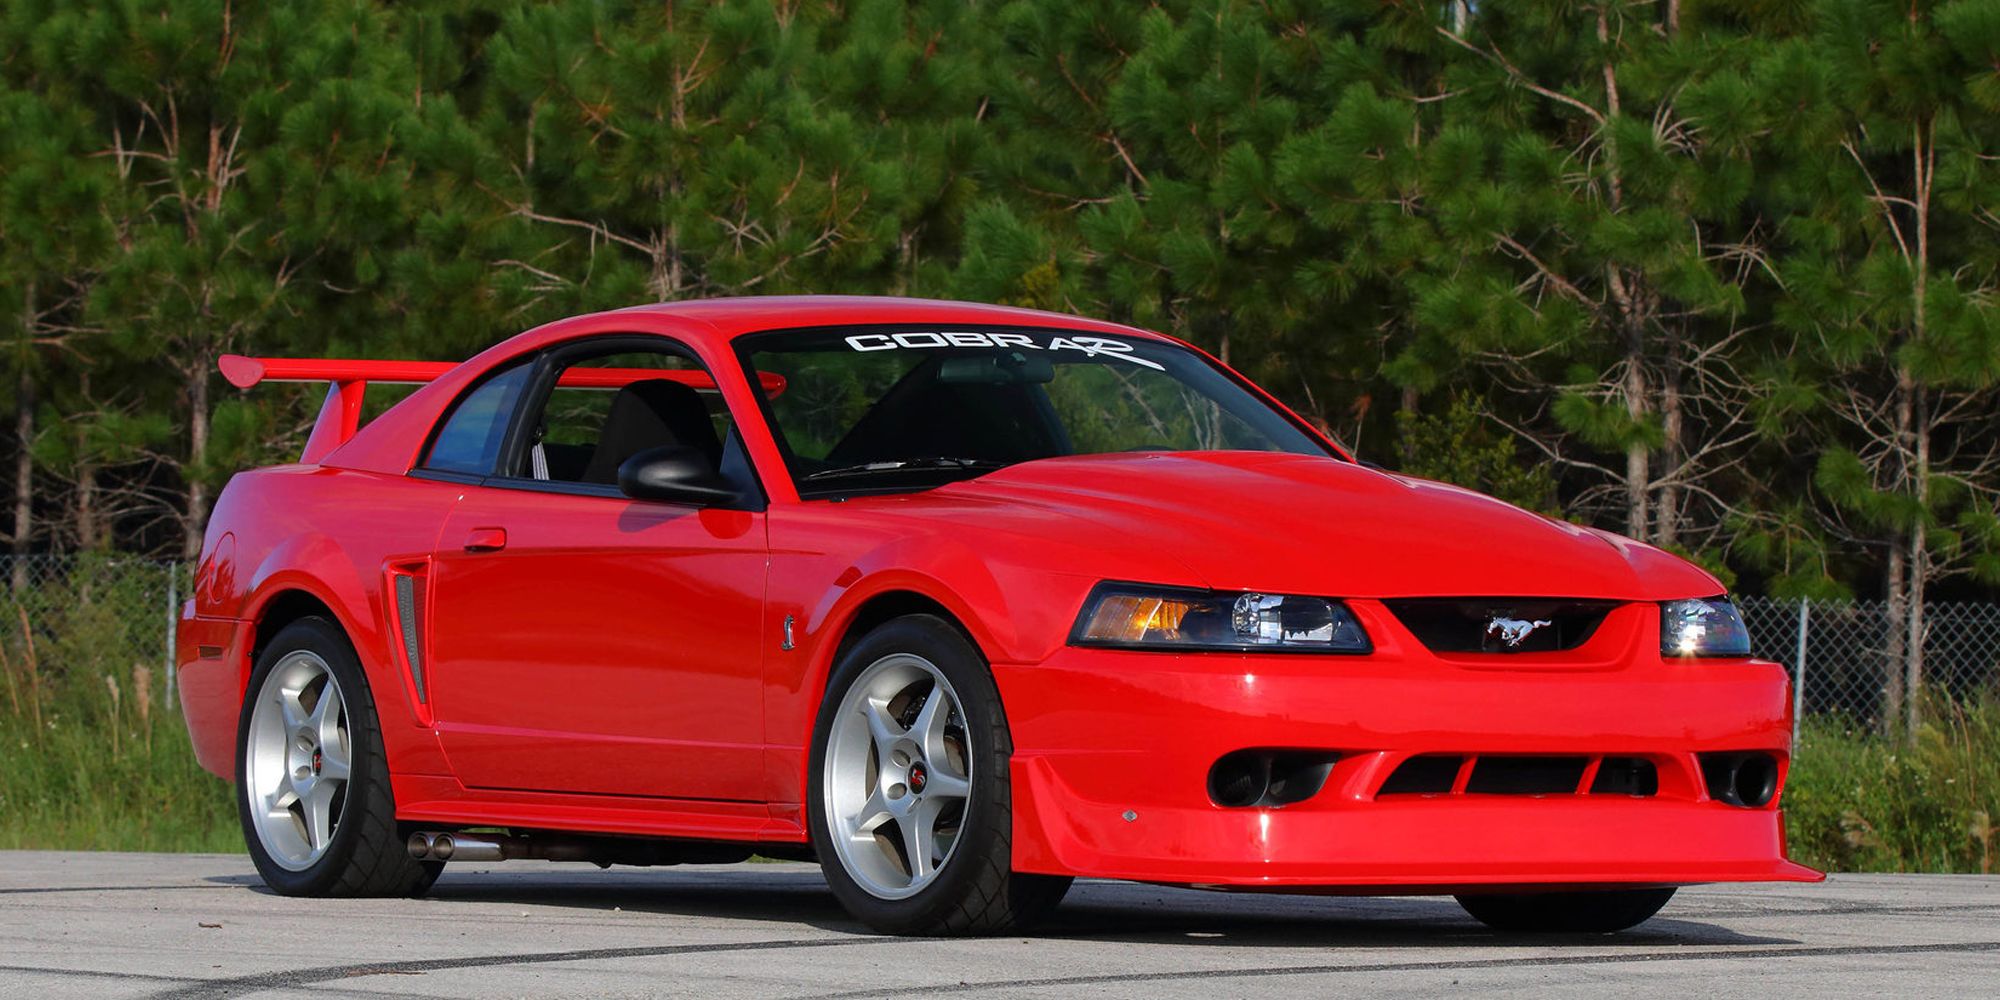 The front of the SVT Cobra